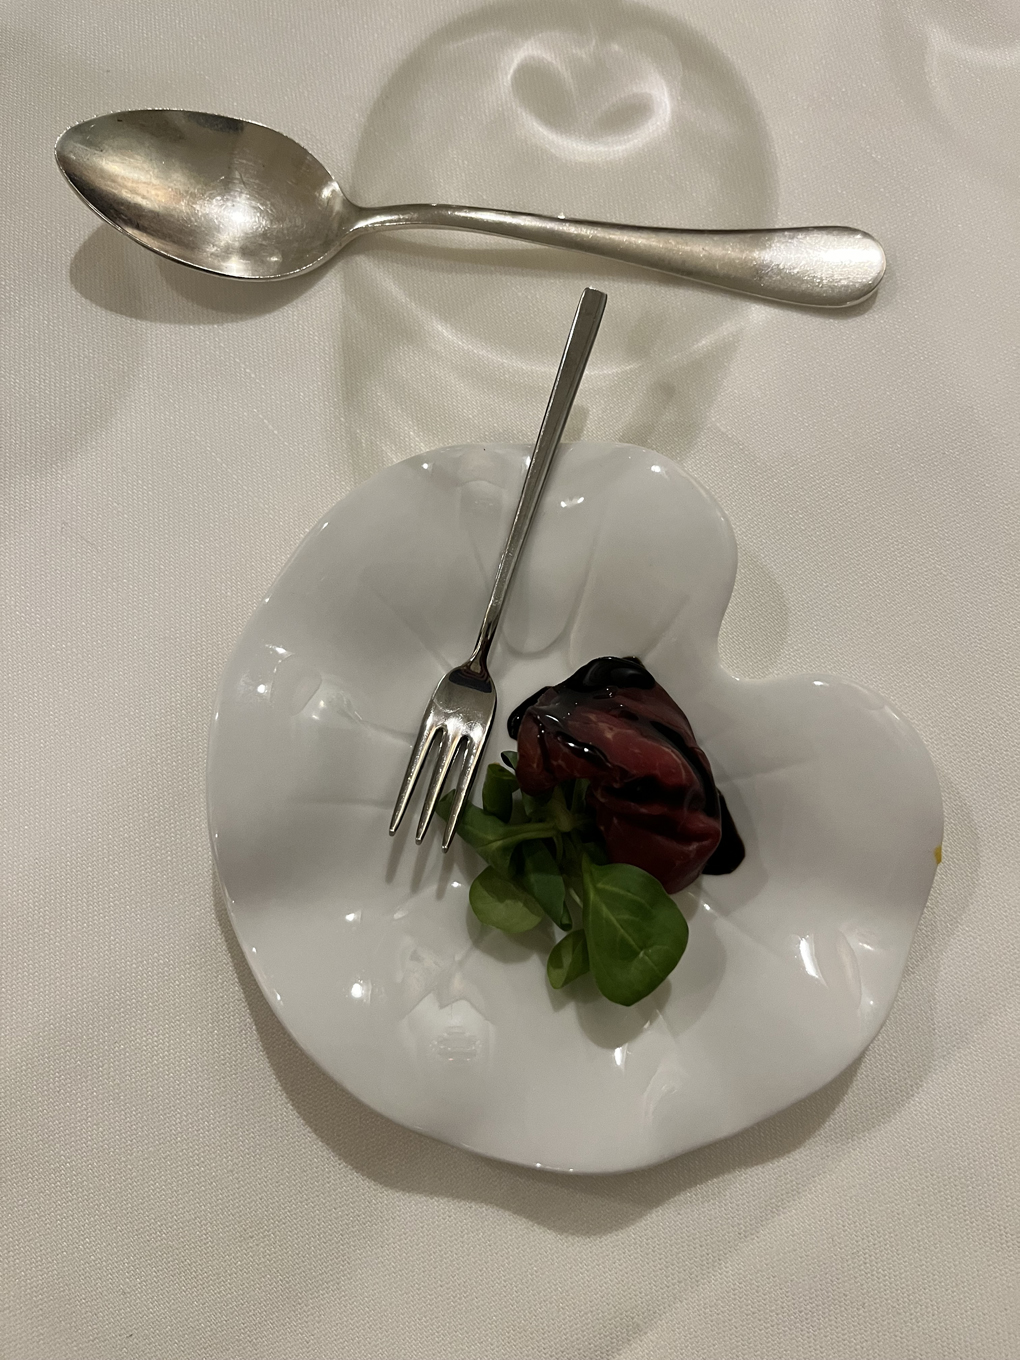 A bite-sized piece of smoked meat on a clean white plate. There is polished silver cutlery next to the plate.